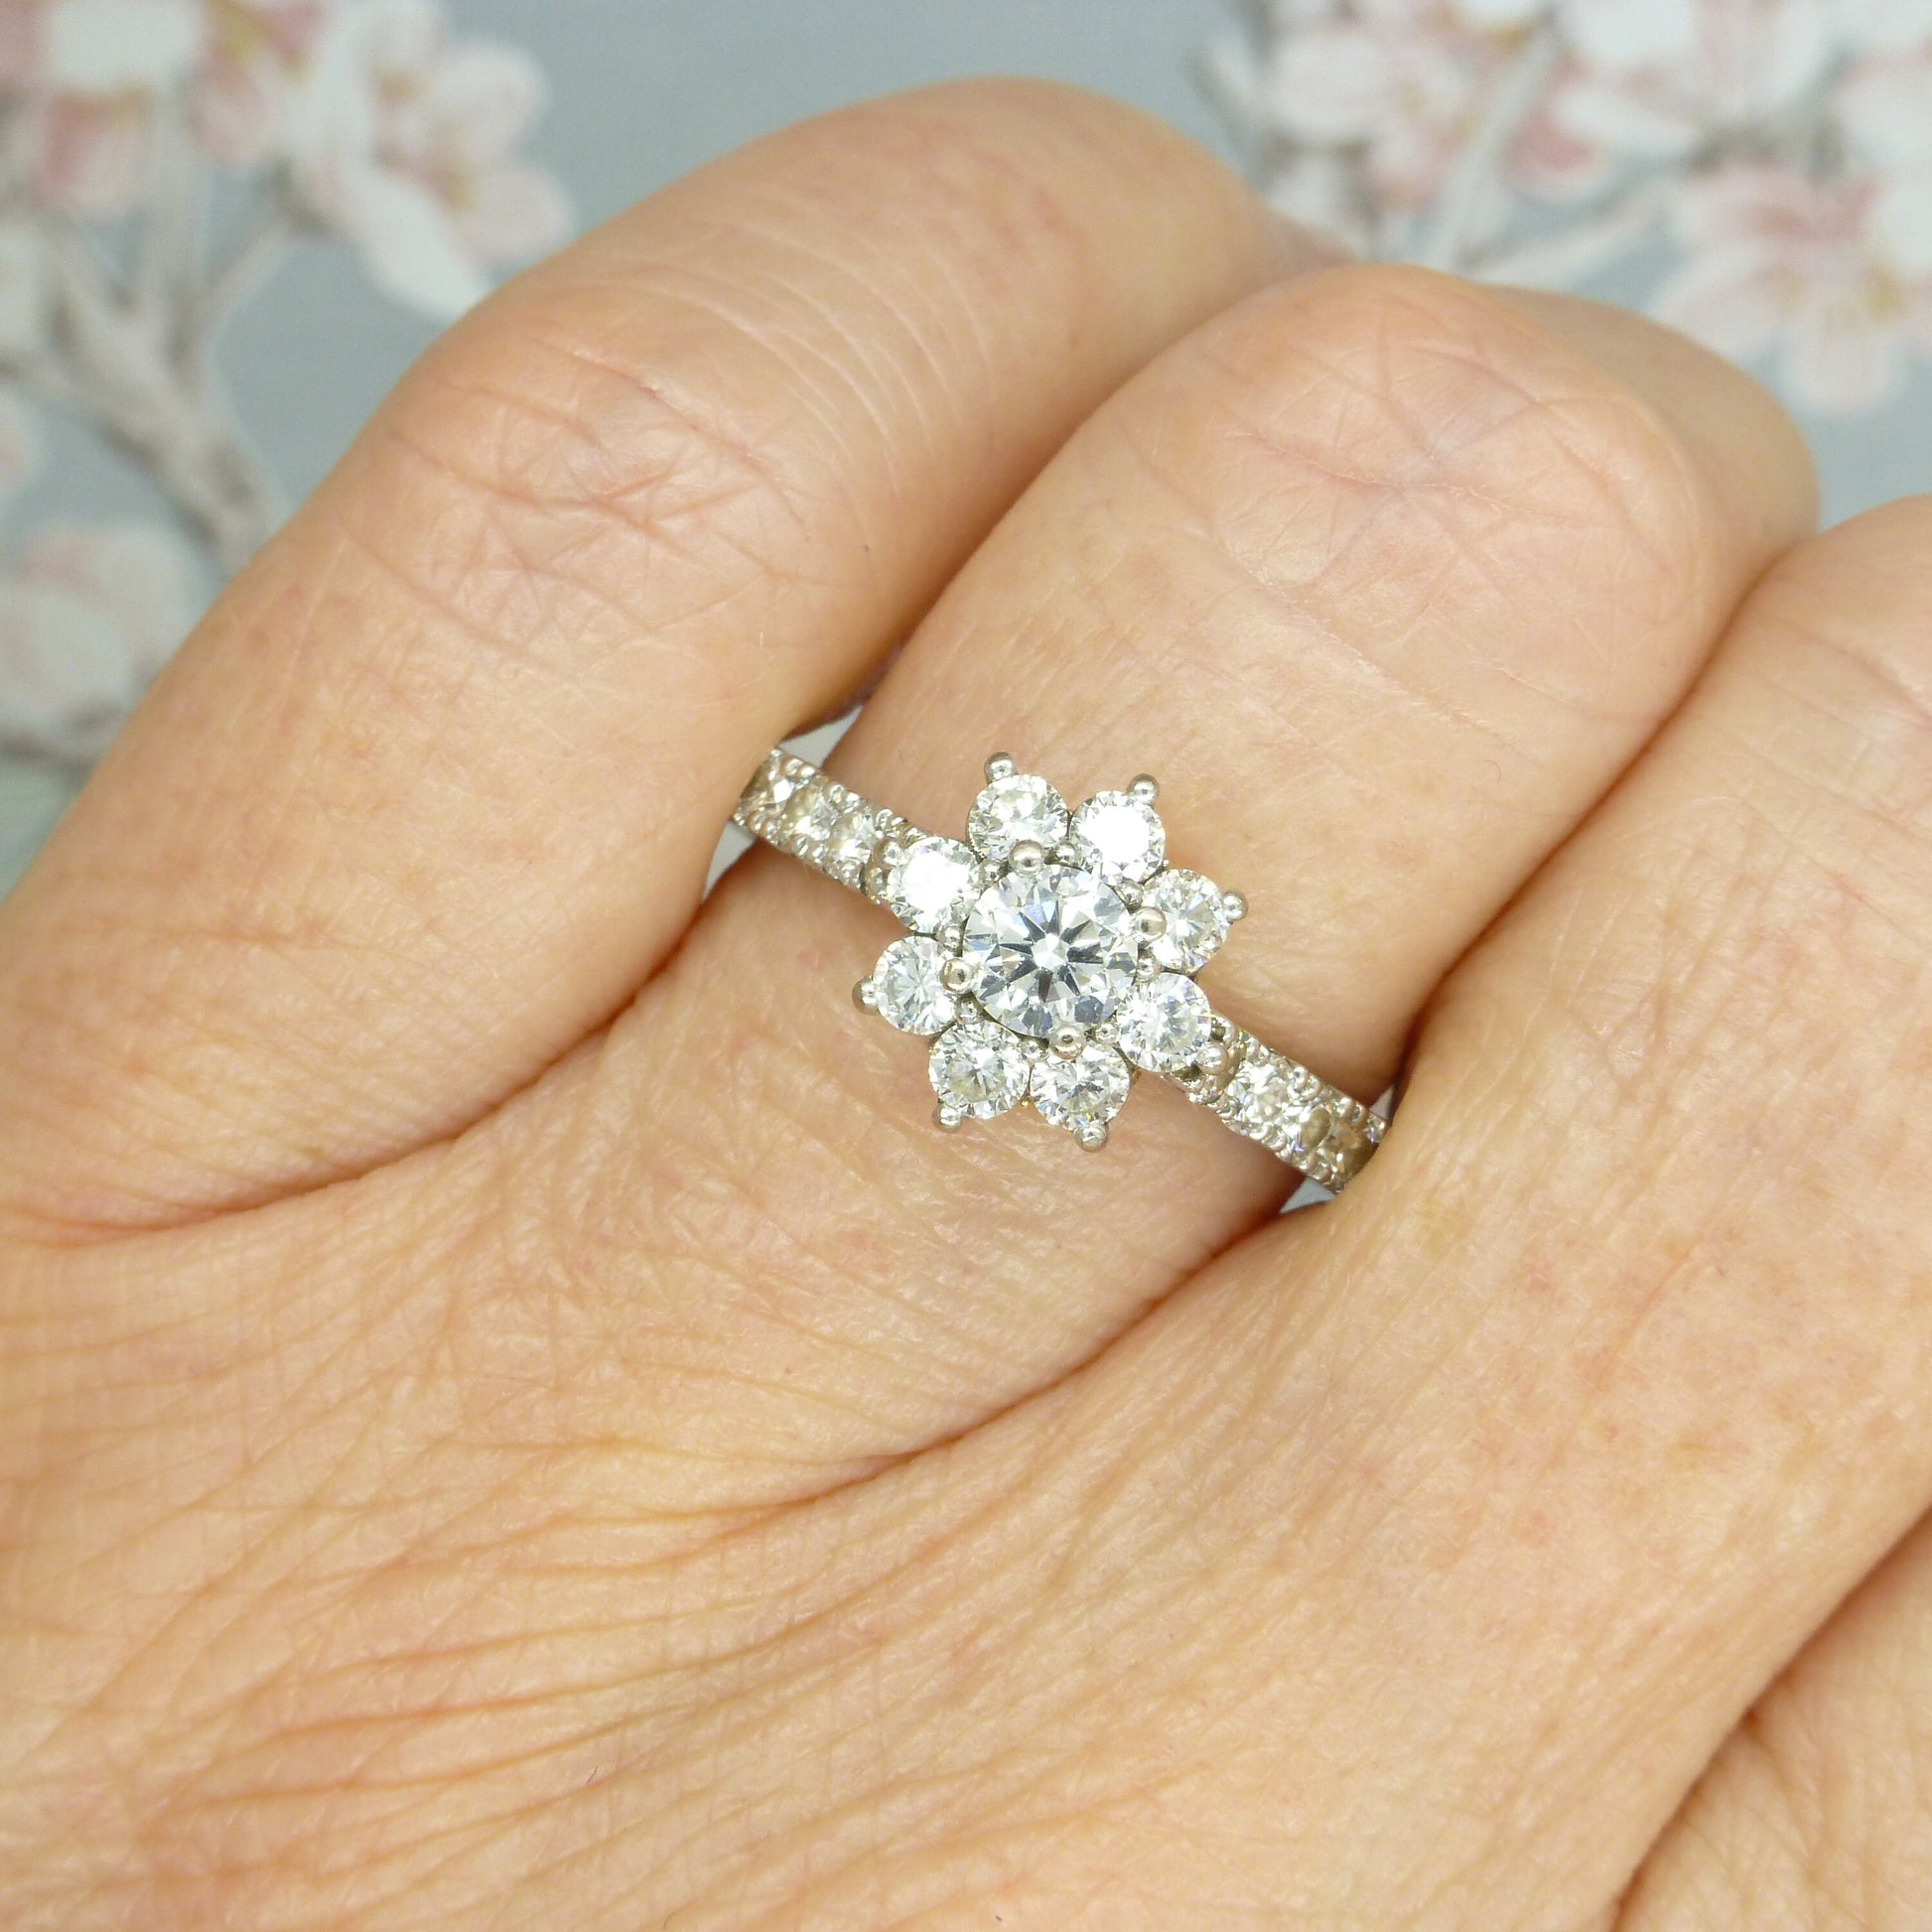 Vintage 18ct white gold diamond flower cluster engagement ring 1.00 tcw